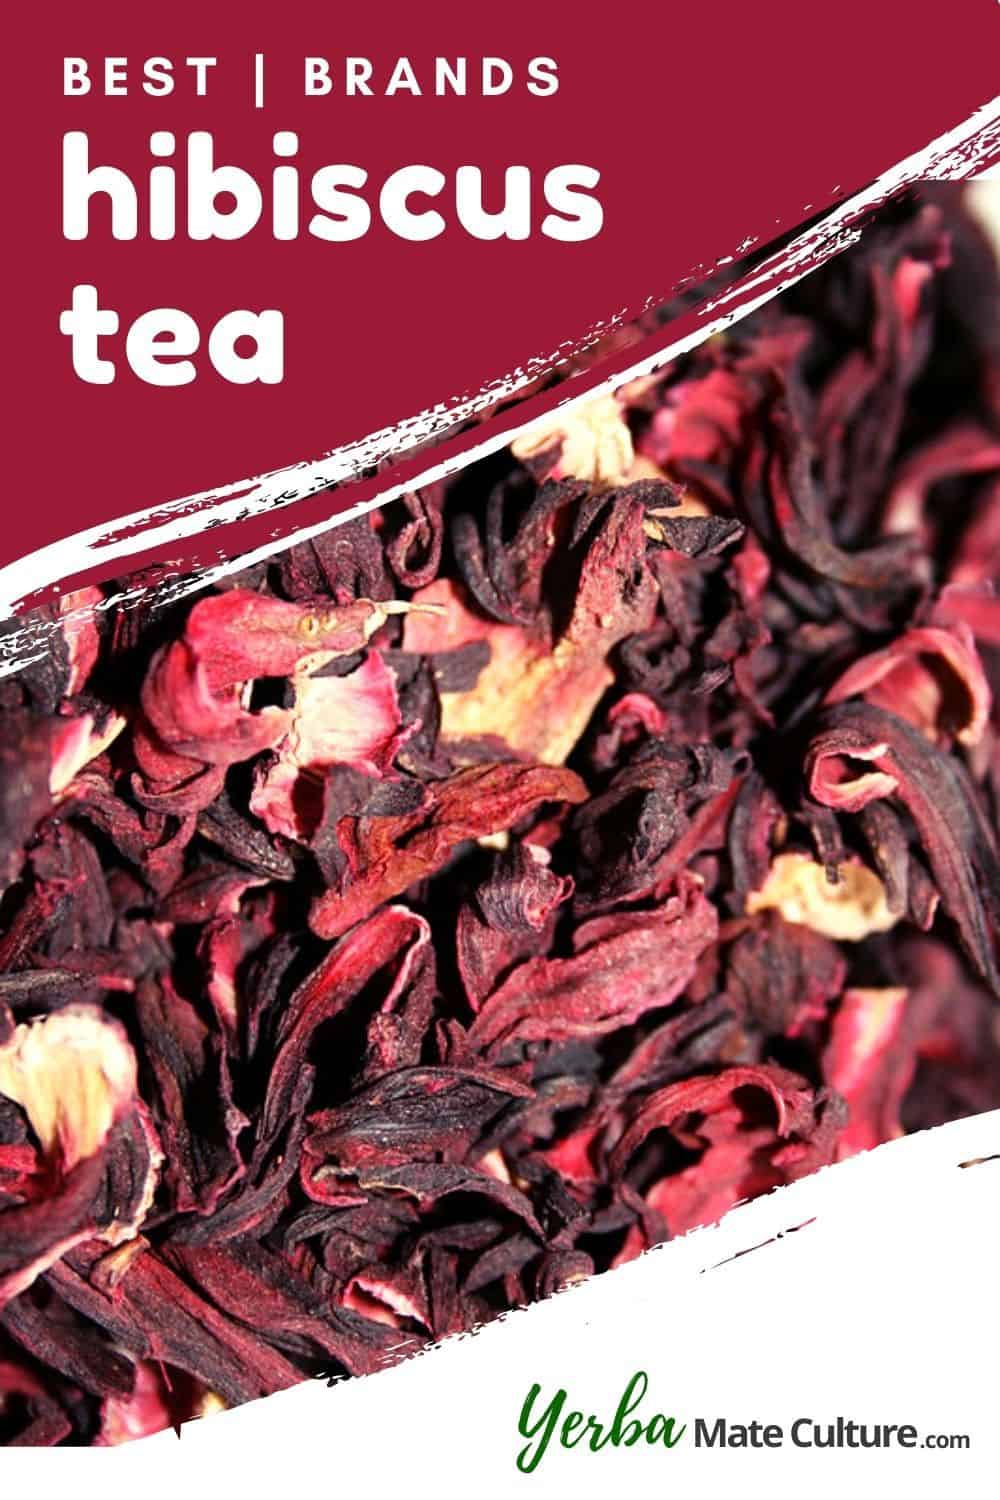 hibiscus tea brands and products